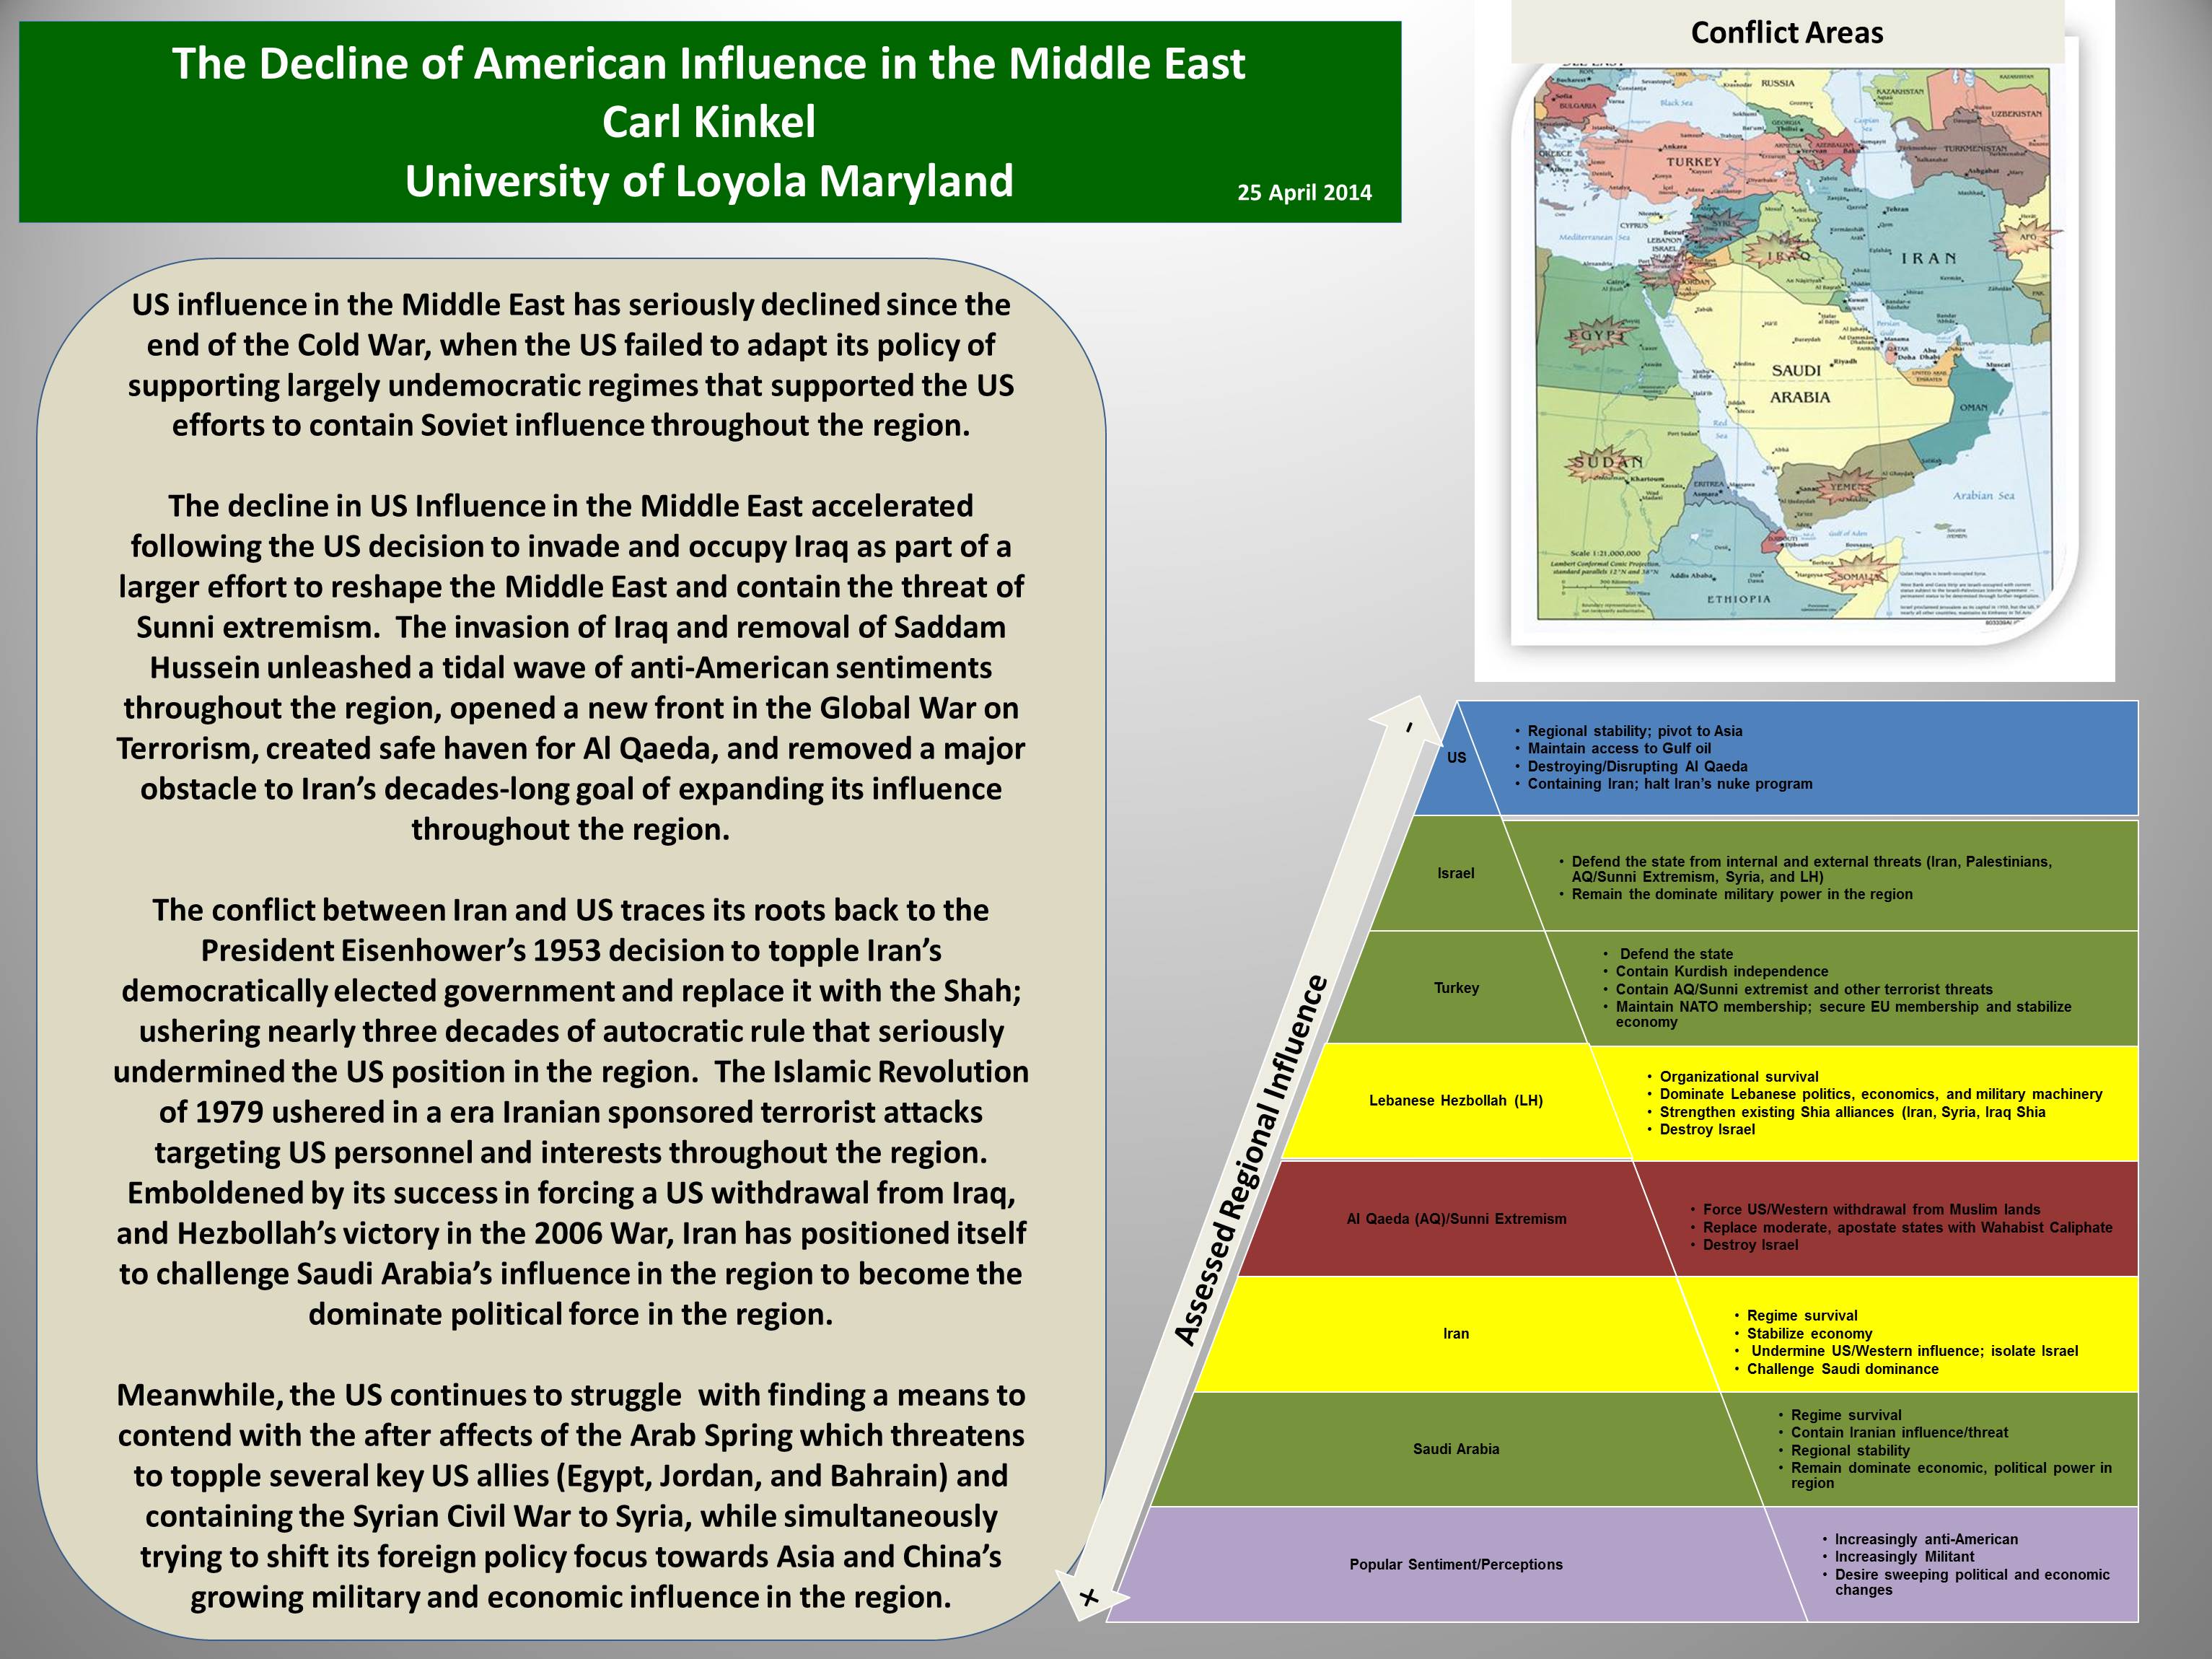 poster image: 'The Decline in American Influence in the Middle East'